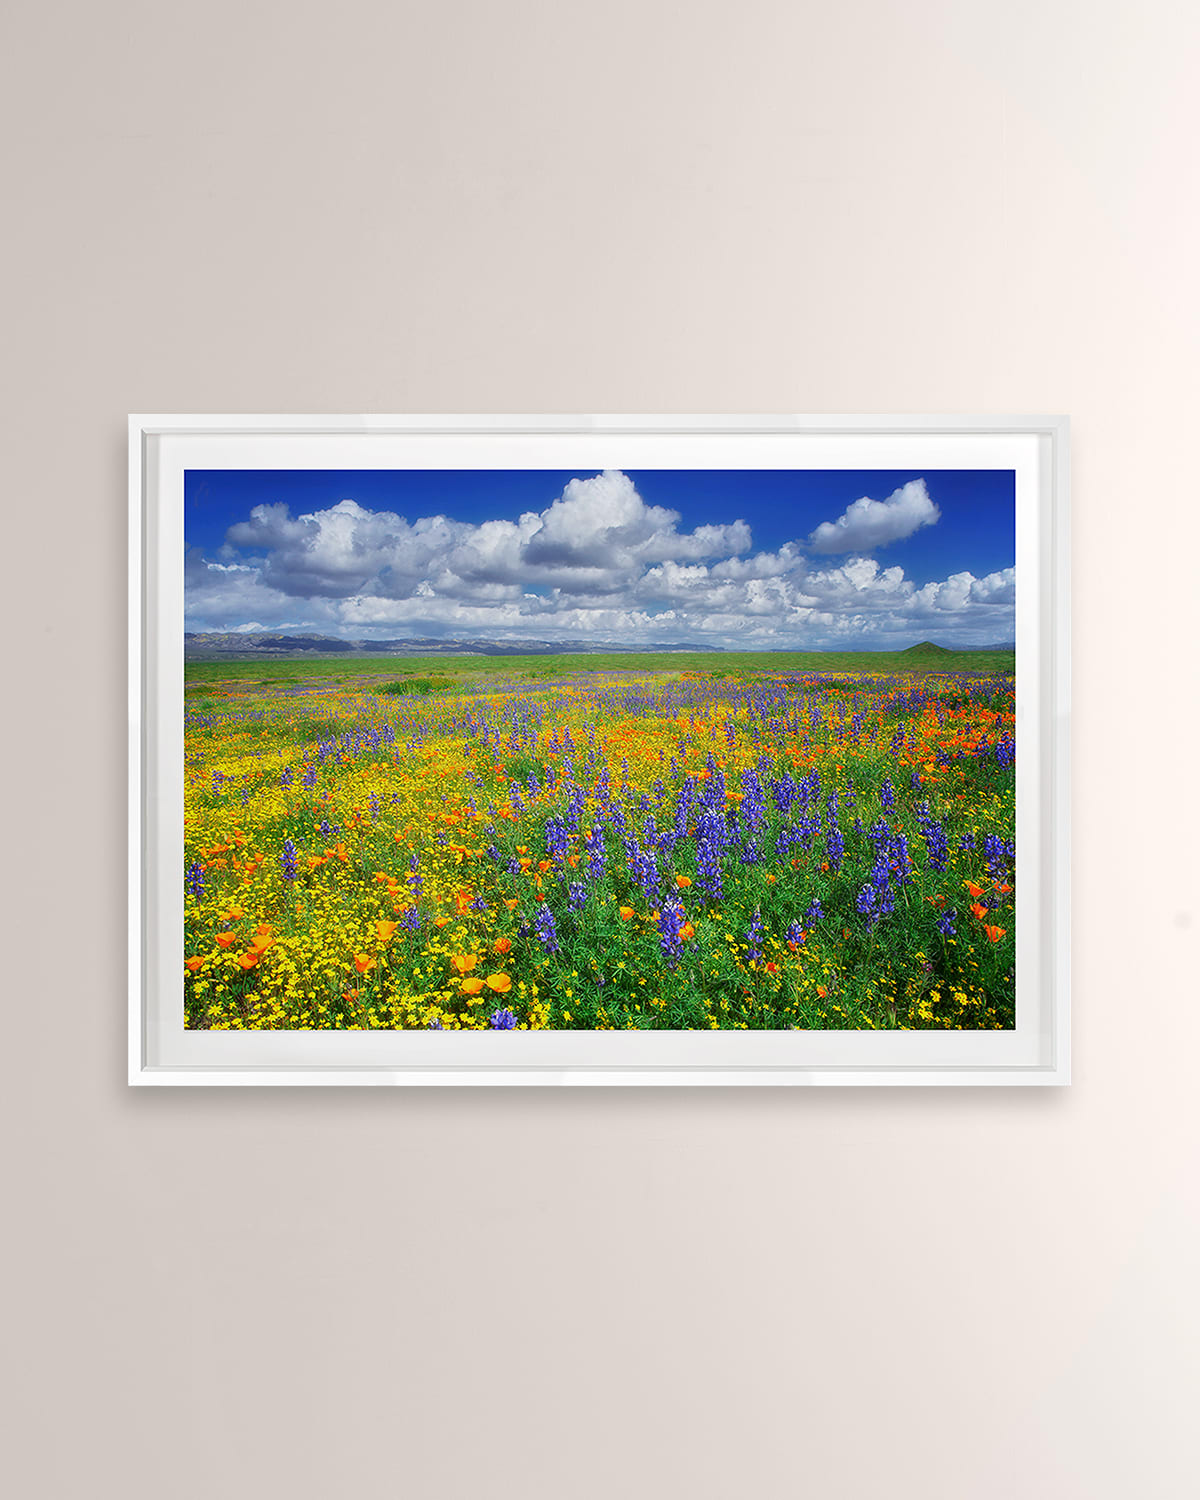 Shop Grand Image Home Lupin And Poppies, Carrizo Plain National Monument Digital Art Print By Photodf In White